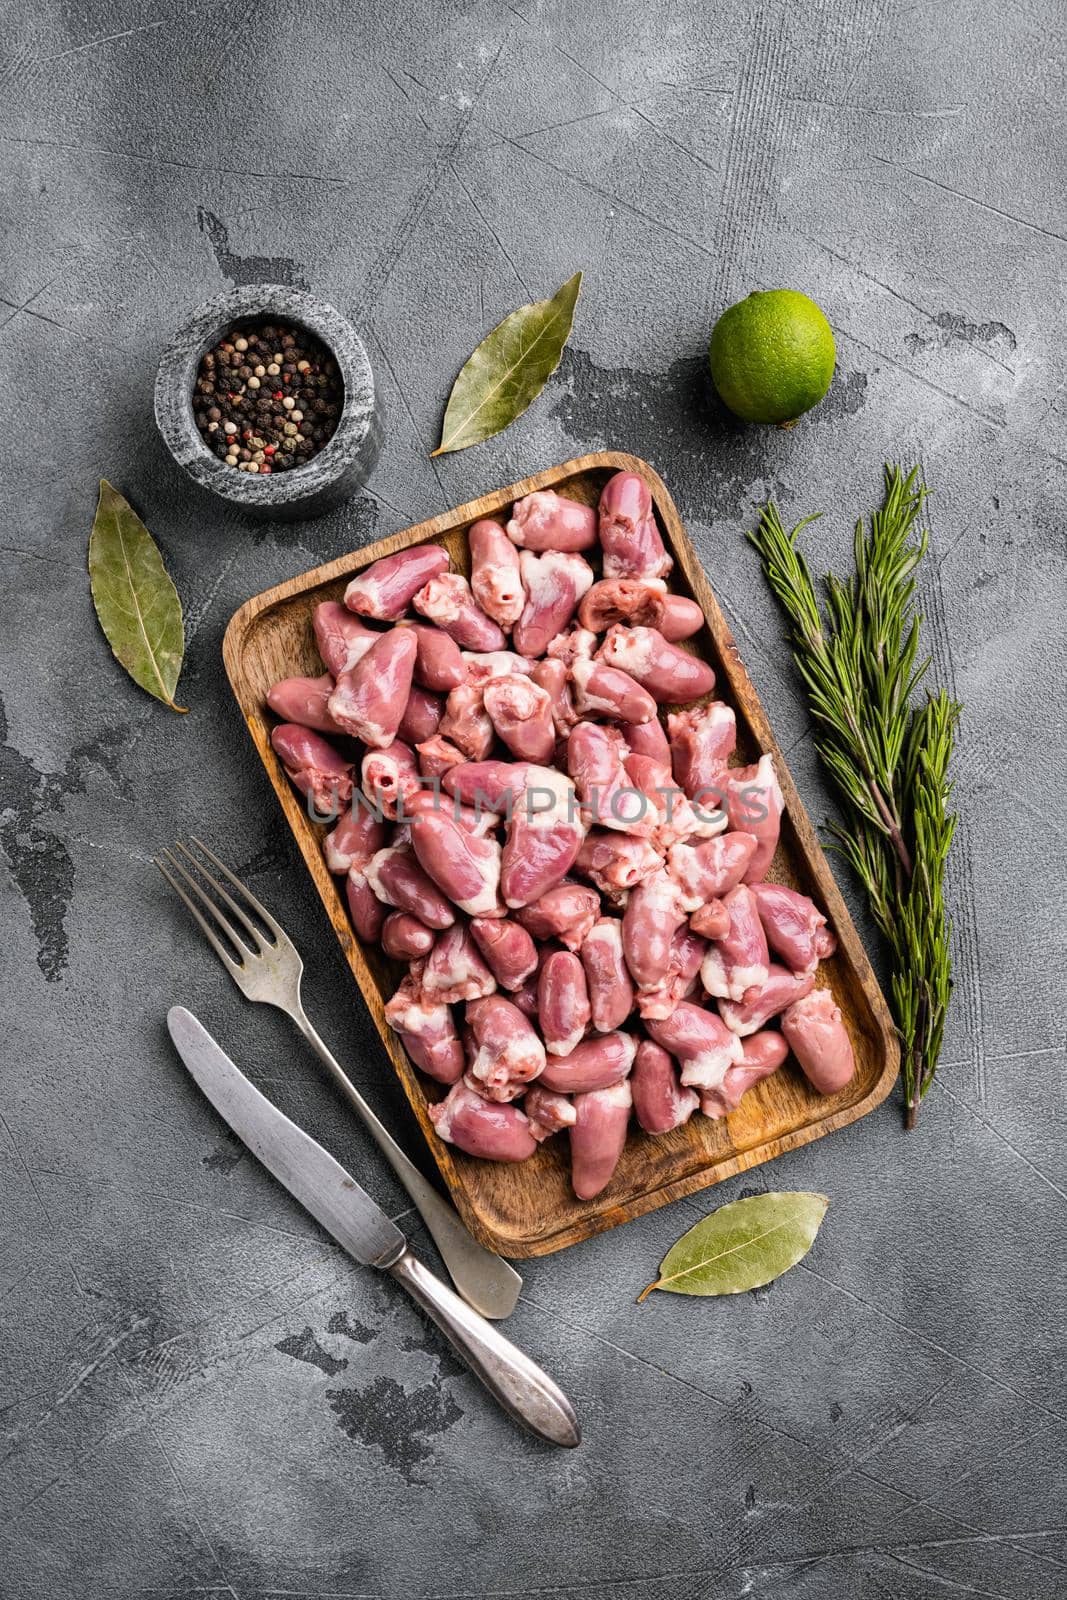 Raw uncooked chicken gizzards, chicken hearts, on gray stone table background, top view flat lay by Ilianesolenyi